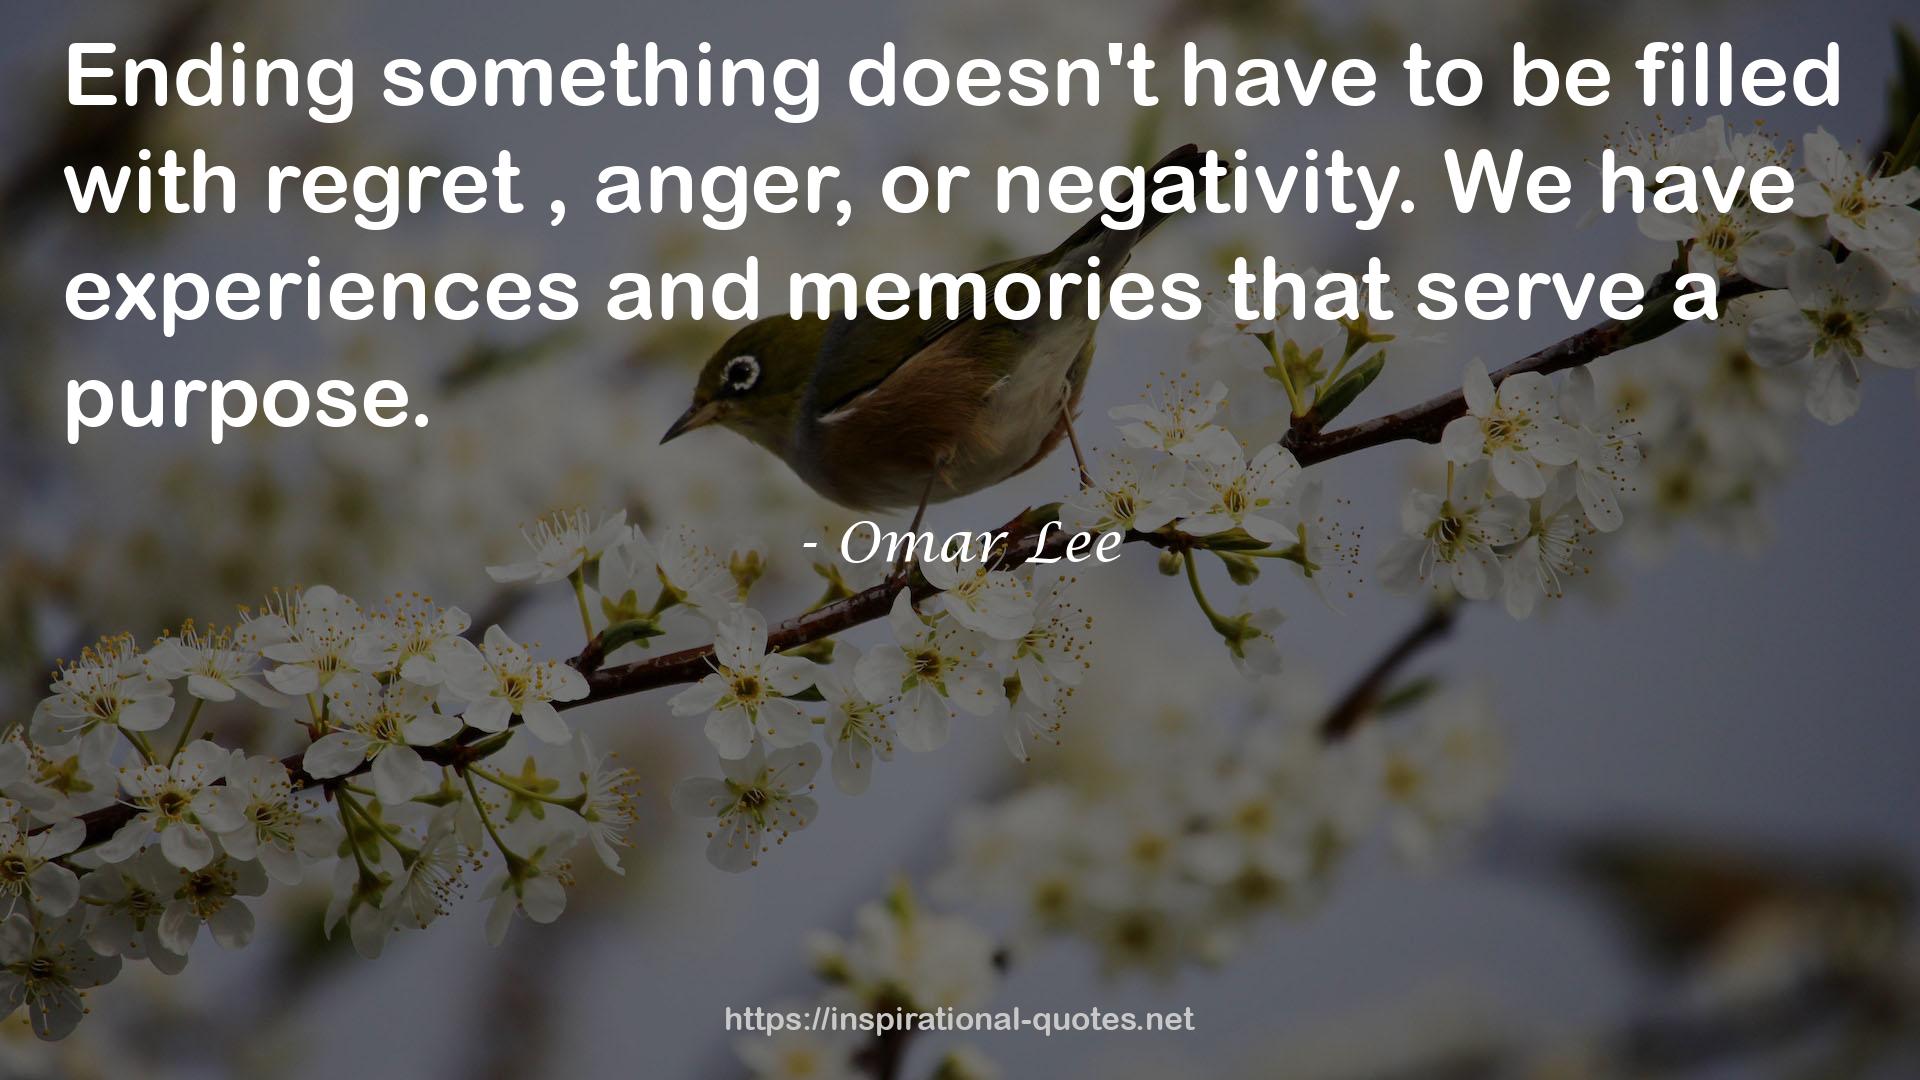 Omar Lee QUOTES